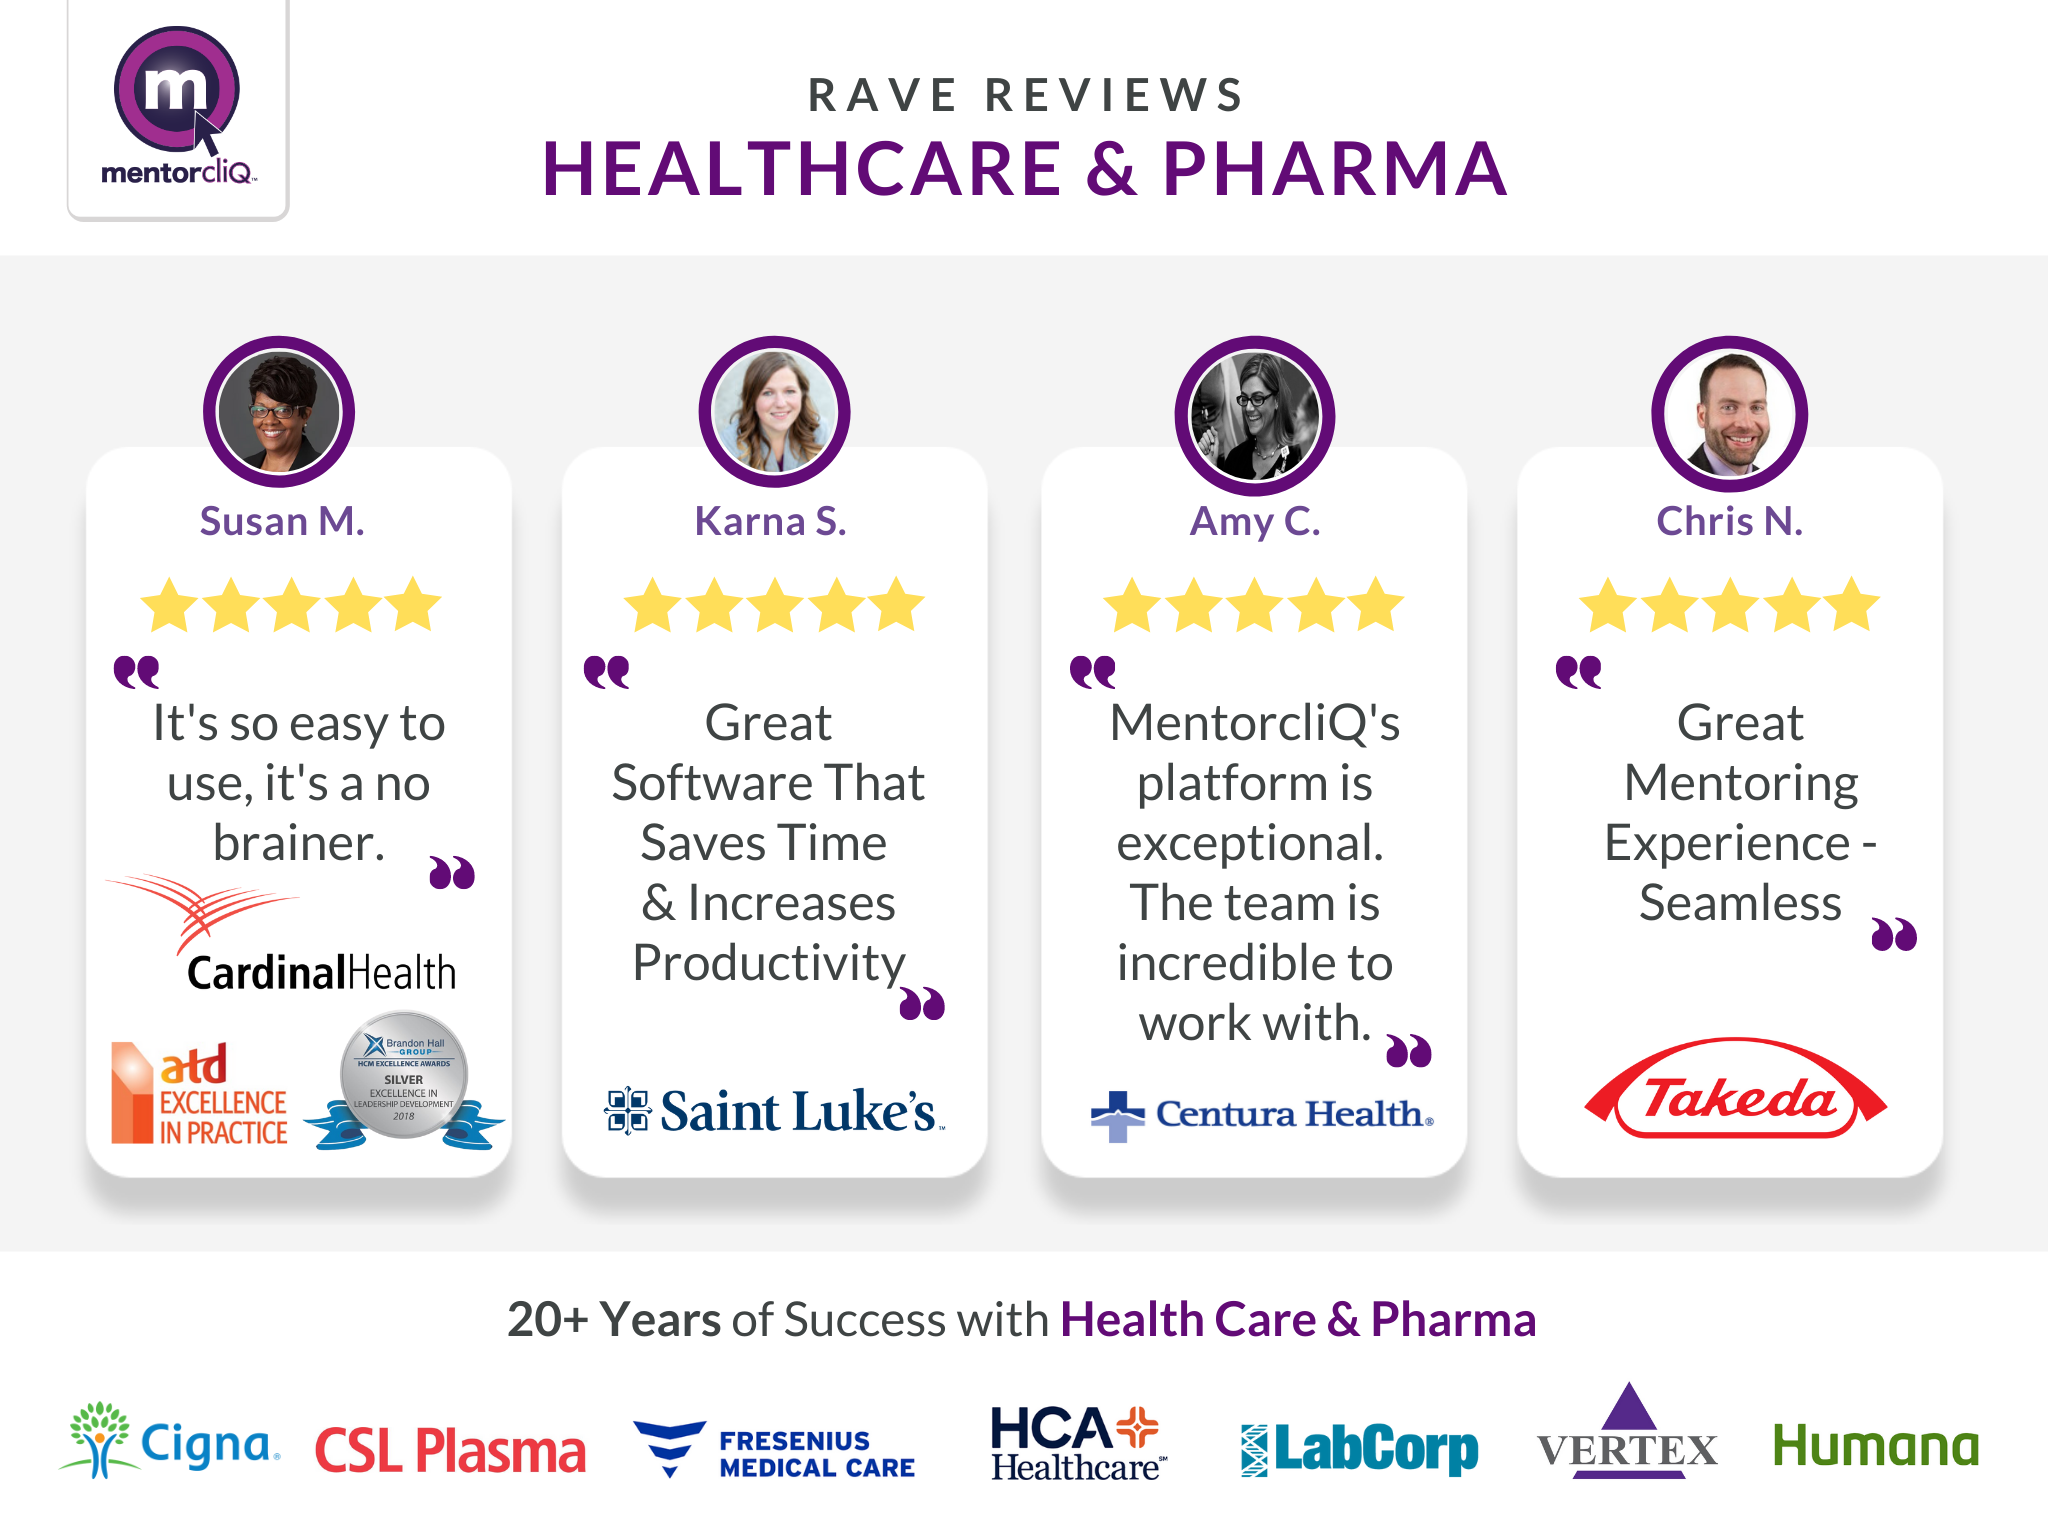 MentorcliQ Software - MentorcliQ has 20+ years of success with global healthcare, pharmacy, and insurance enterprises. Read some of the company reviews from healthcare services organizations who trust MentorcliQ with their talent engagement strategy.